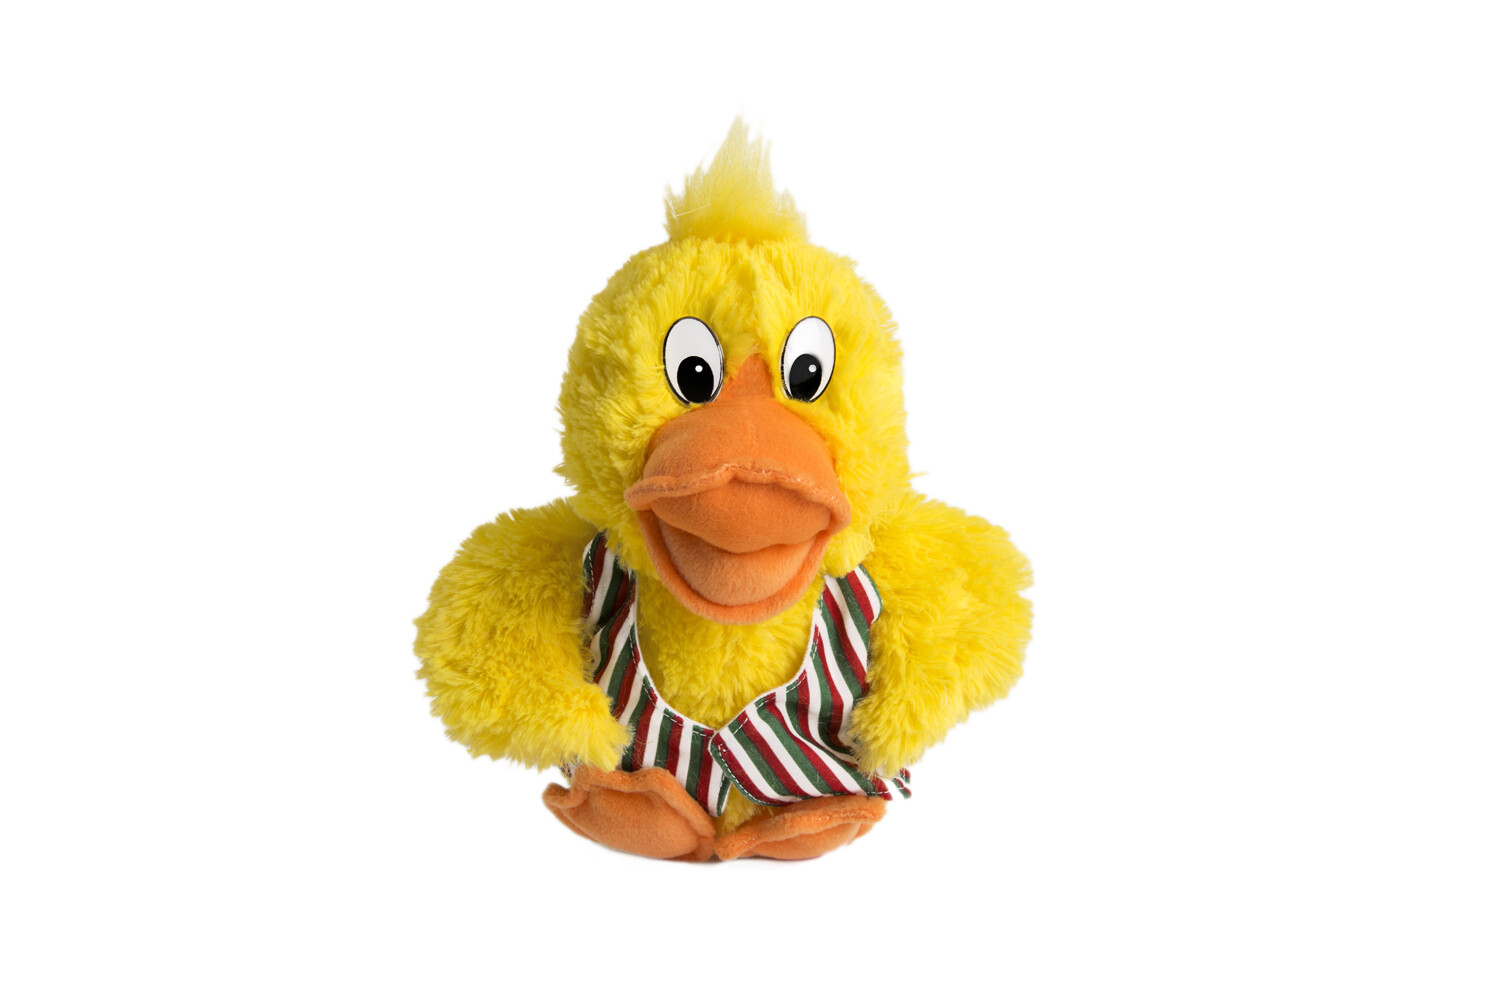 FESTIVE DEALS! Buy a small disco duck soft toy and receive a Disco Duck album download FREE! Hurry offer only valid while stocks last.